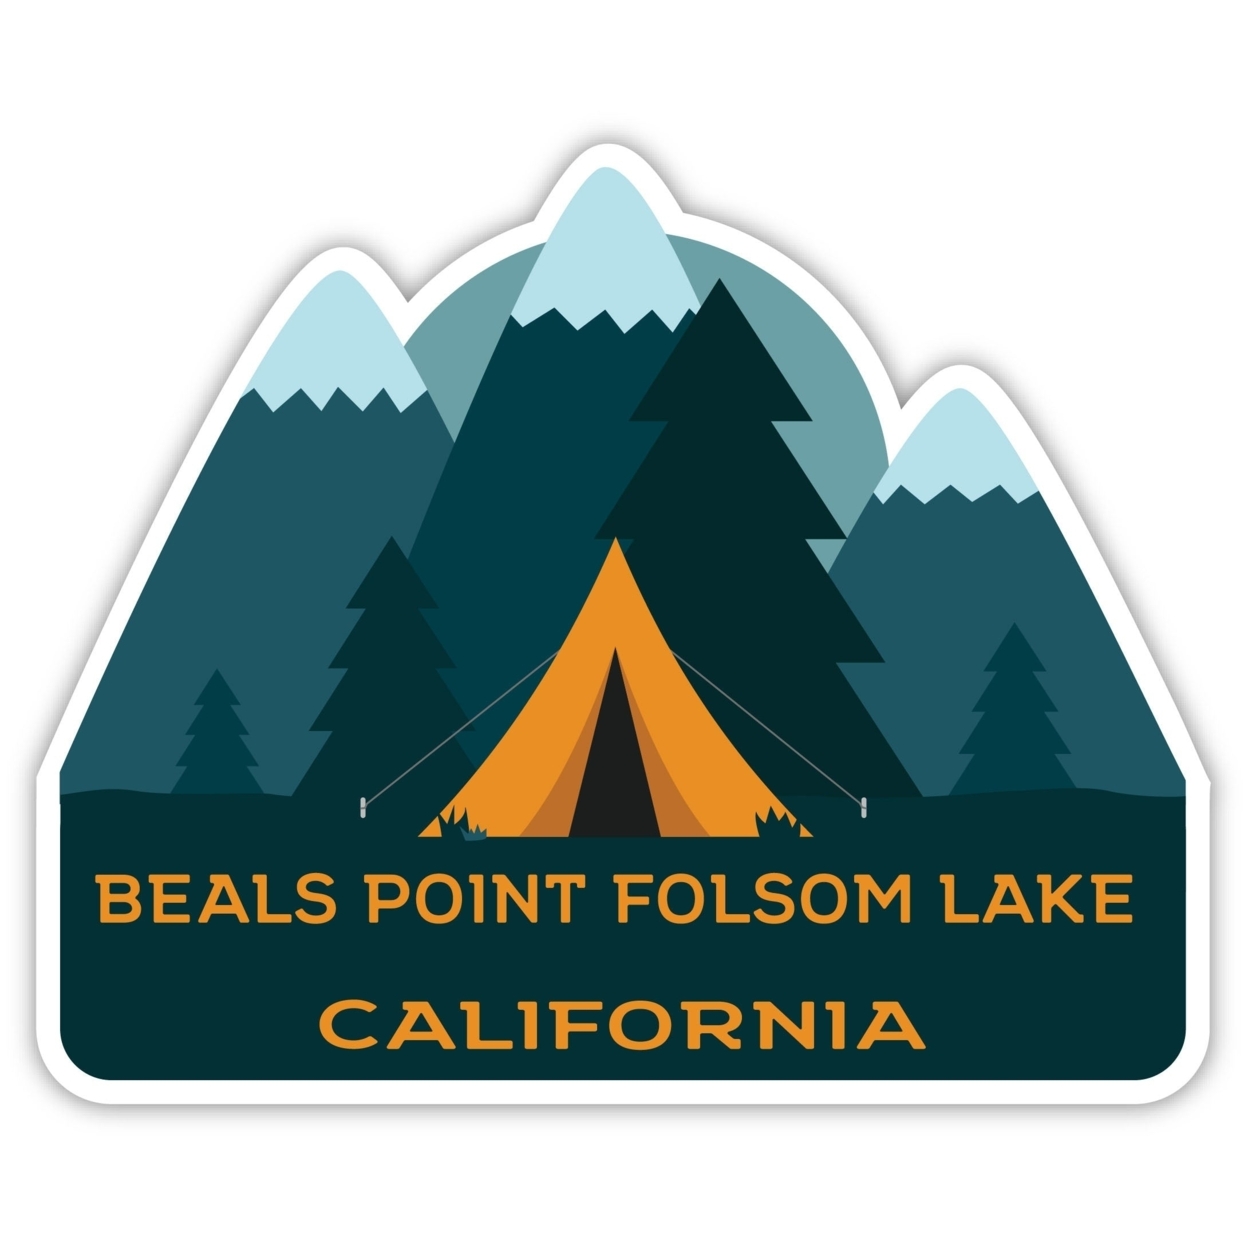 Beals Point Folsom Lake California Souvenir Decorative Stickers (Choose Theme And Size) - 4-Pack, 4-Inch, Bear